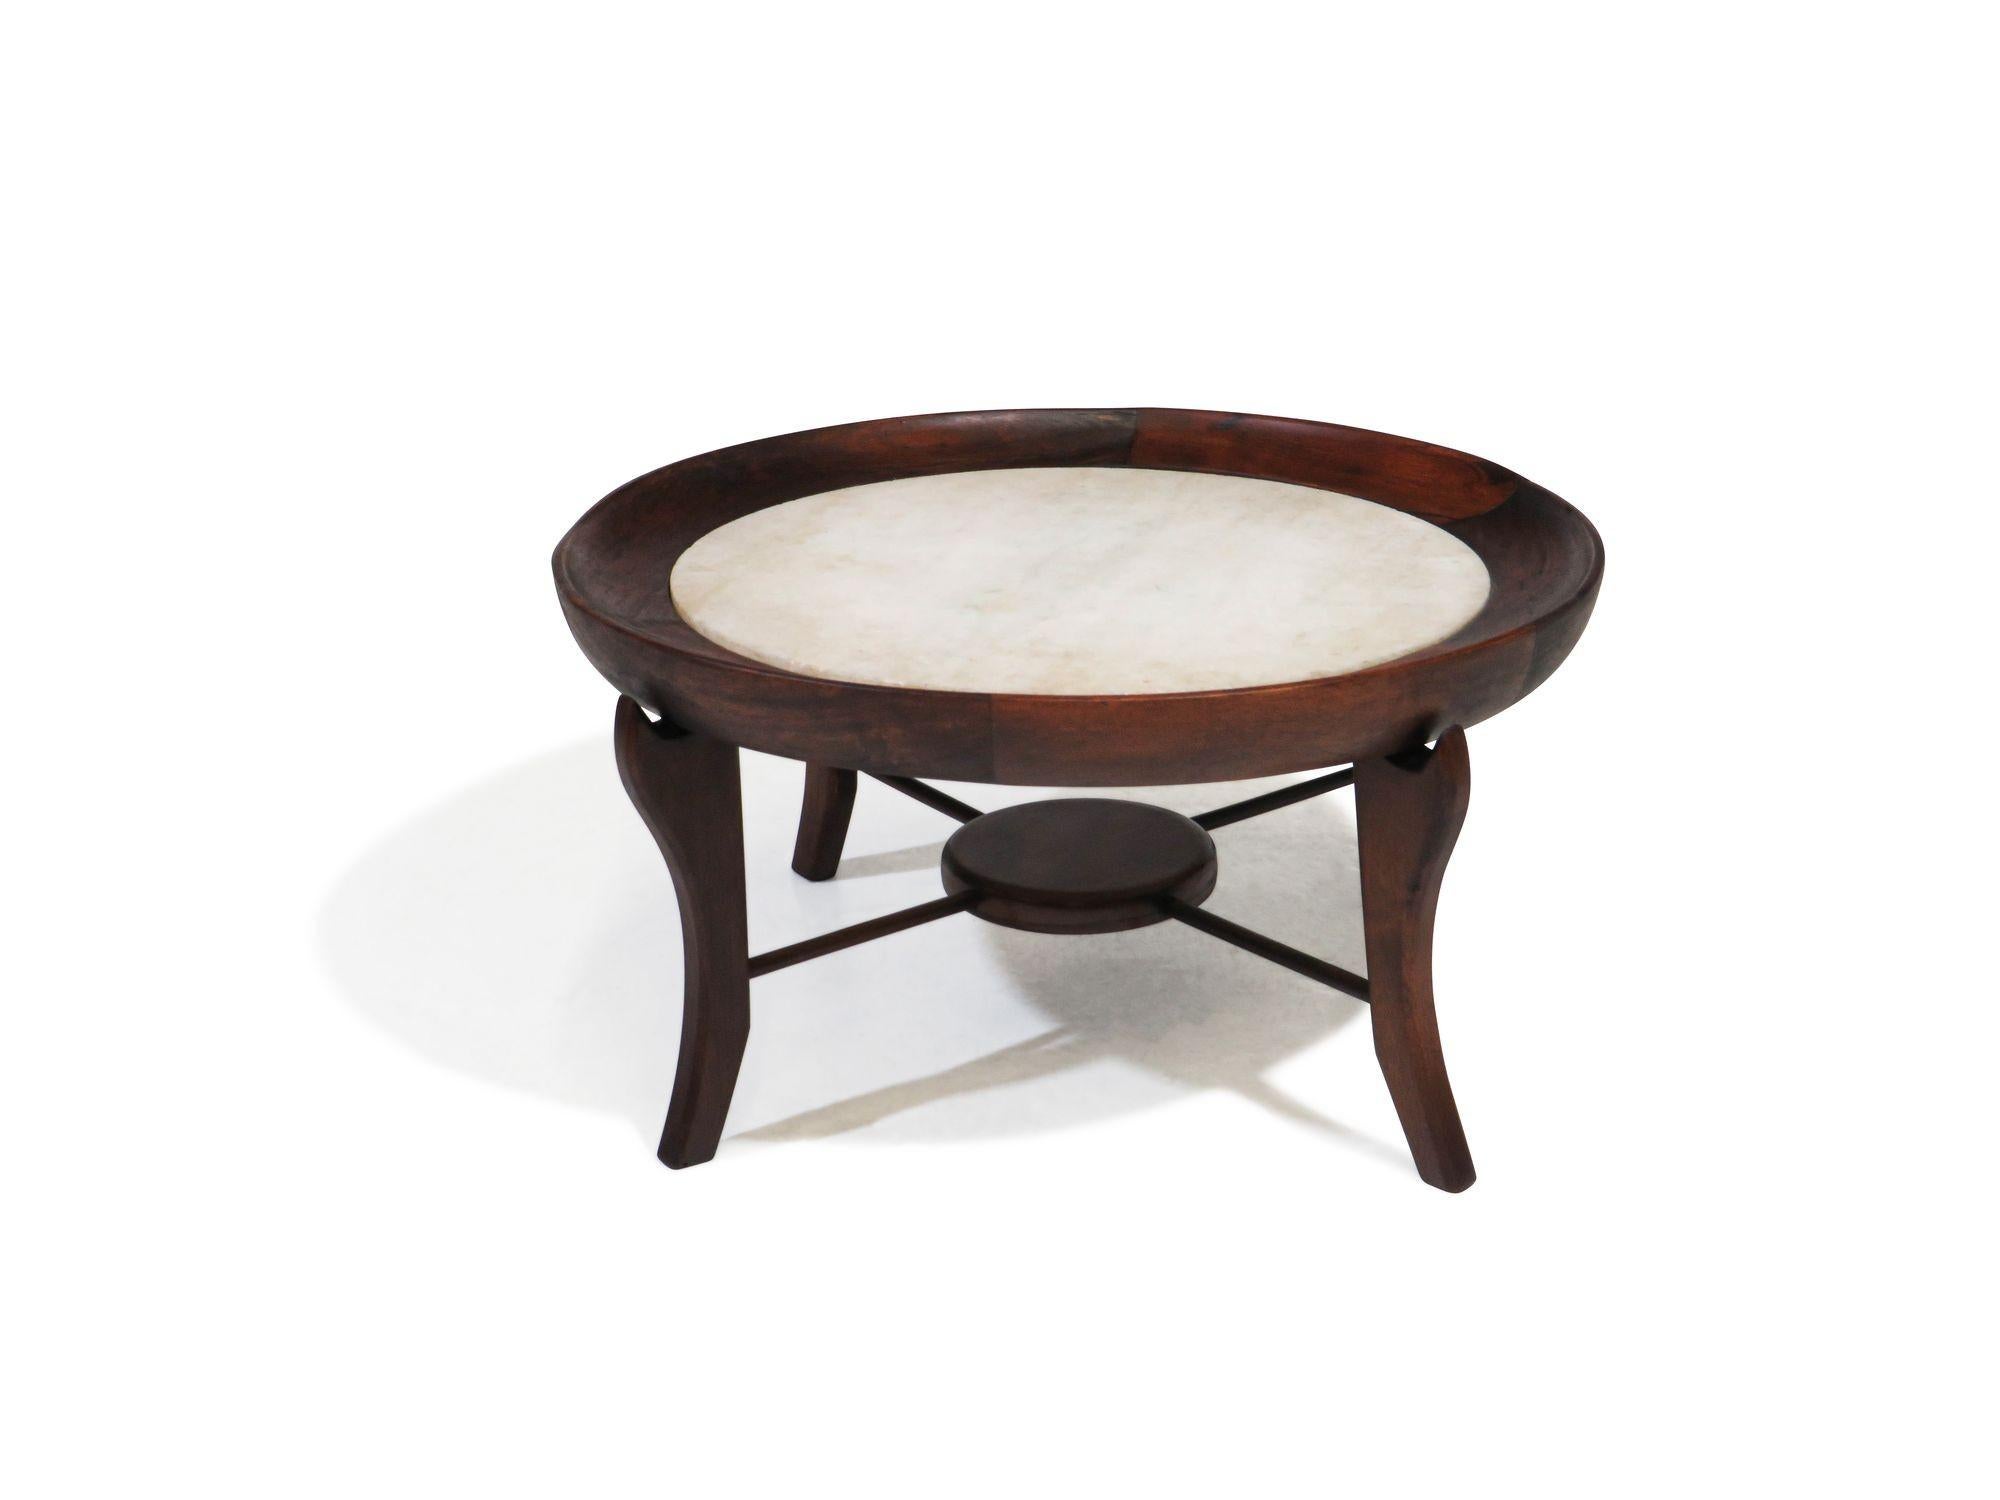 Brazilian Caviuna wood coffee table attributed Giuseppe Scapinelli. Round sculptural frame with marble top surface.